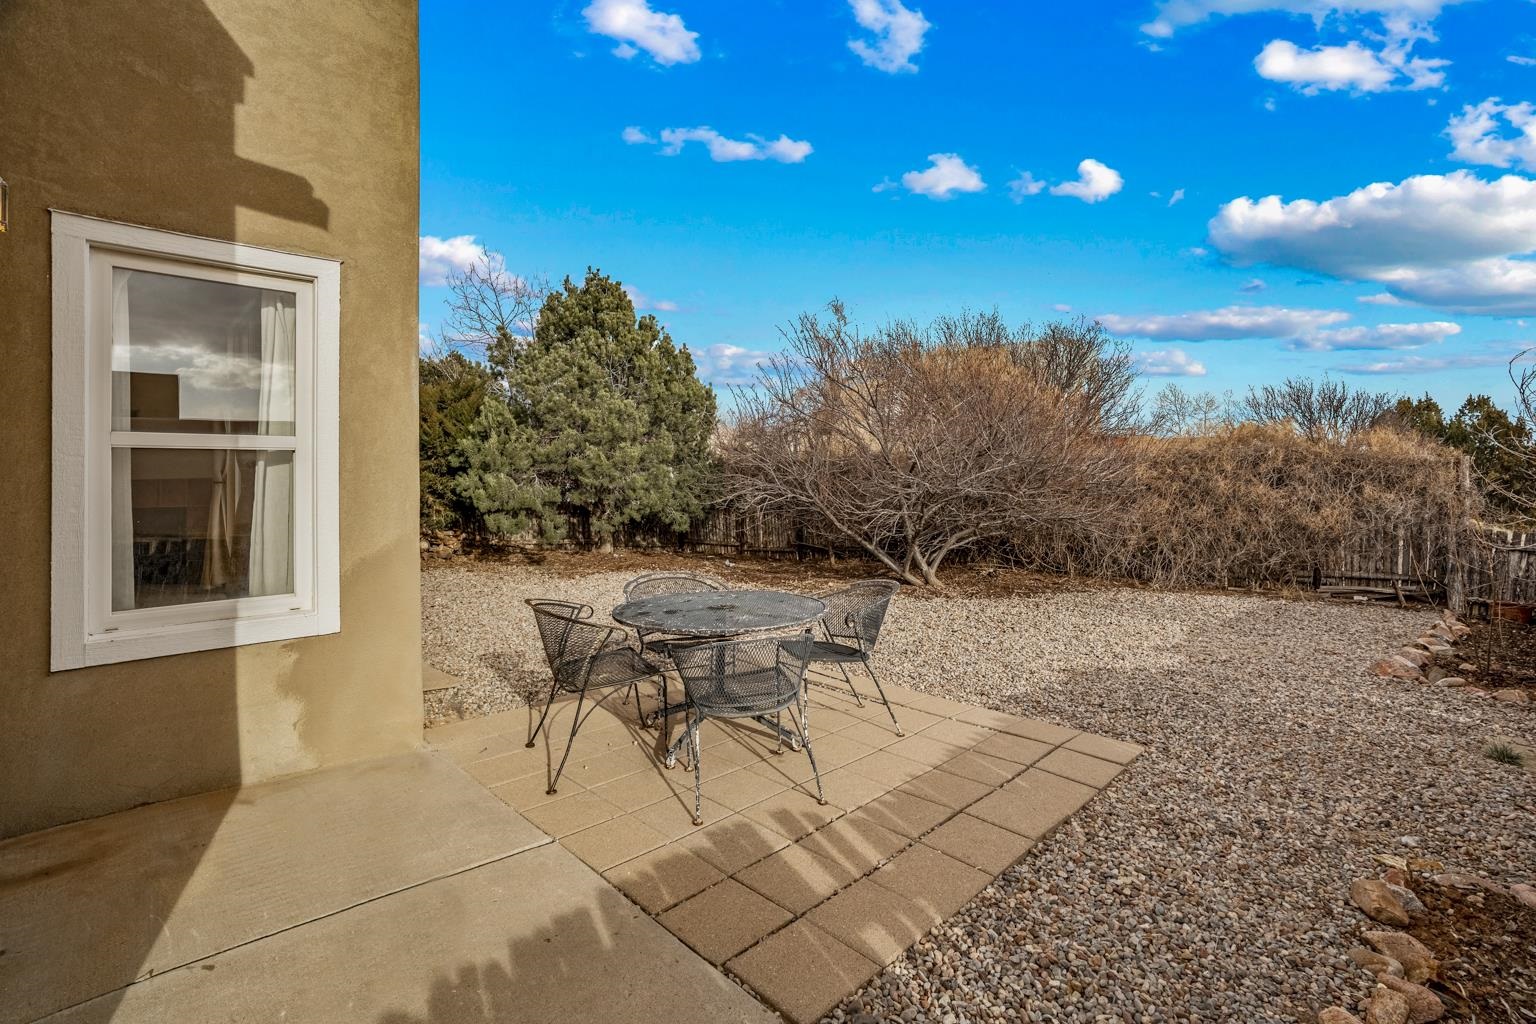 4342 Lost Feather, Santa Fe, New Mexico 87507, 3 Bedrooms Bedrooms, ,2 BathroomsBathrooms,Residential,For Sale,4342 Lost Feather,202200687